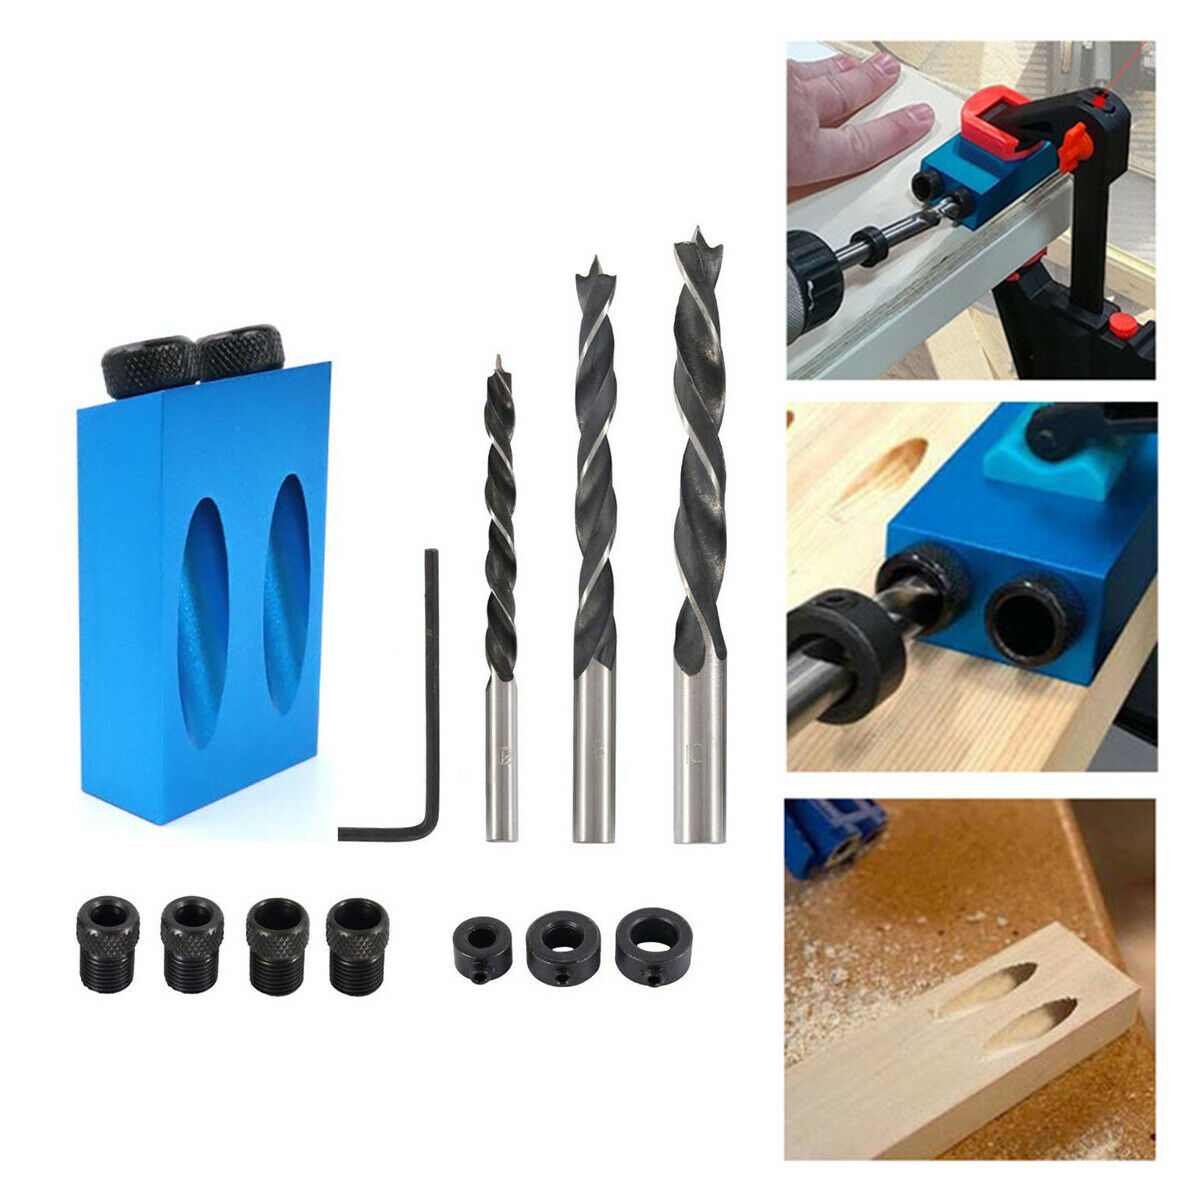 Color : E 7PCS FYYONG 14/15pcs/set Mini Pocket Hole Jig Kit System Joinery Step Drill Bit Accessories Wood Work Tool Set for Woodworking Dropshipping 